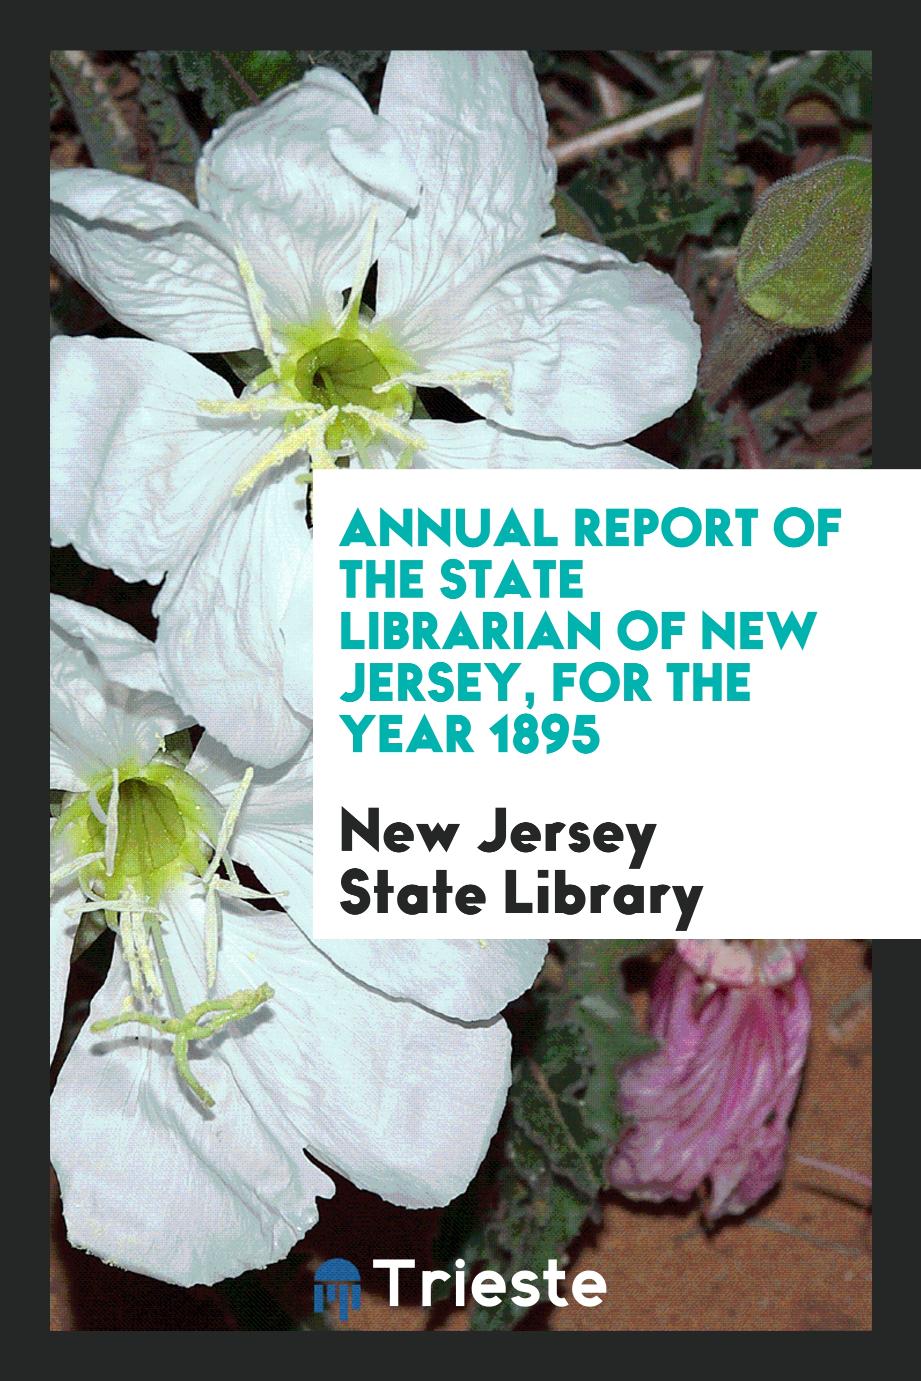 Annual Report of the State Librarian of New Jersey, for the year 1895